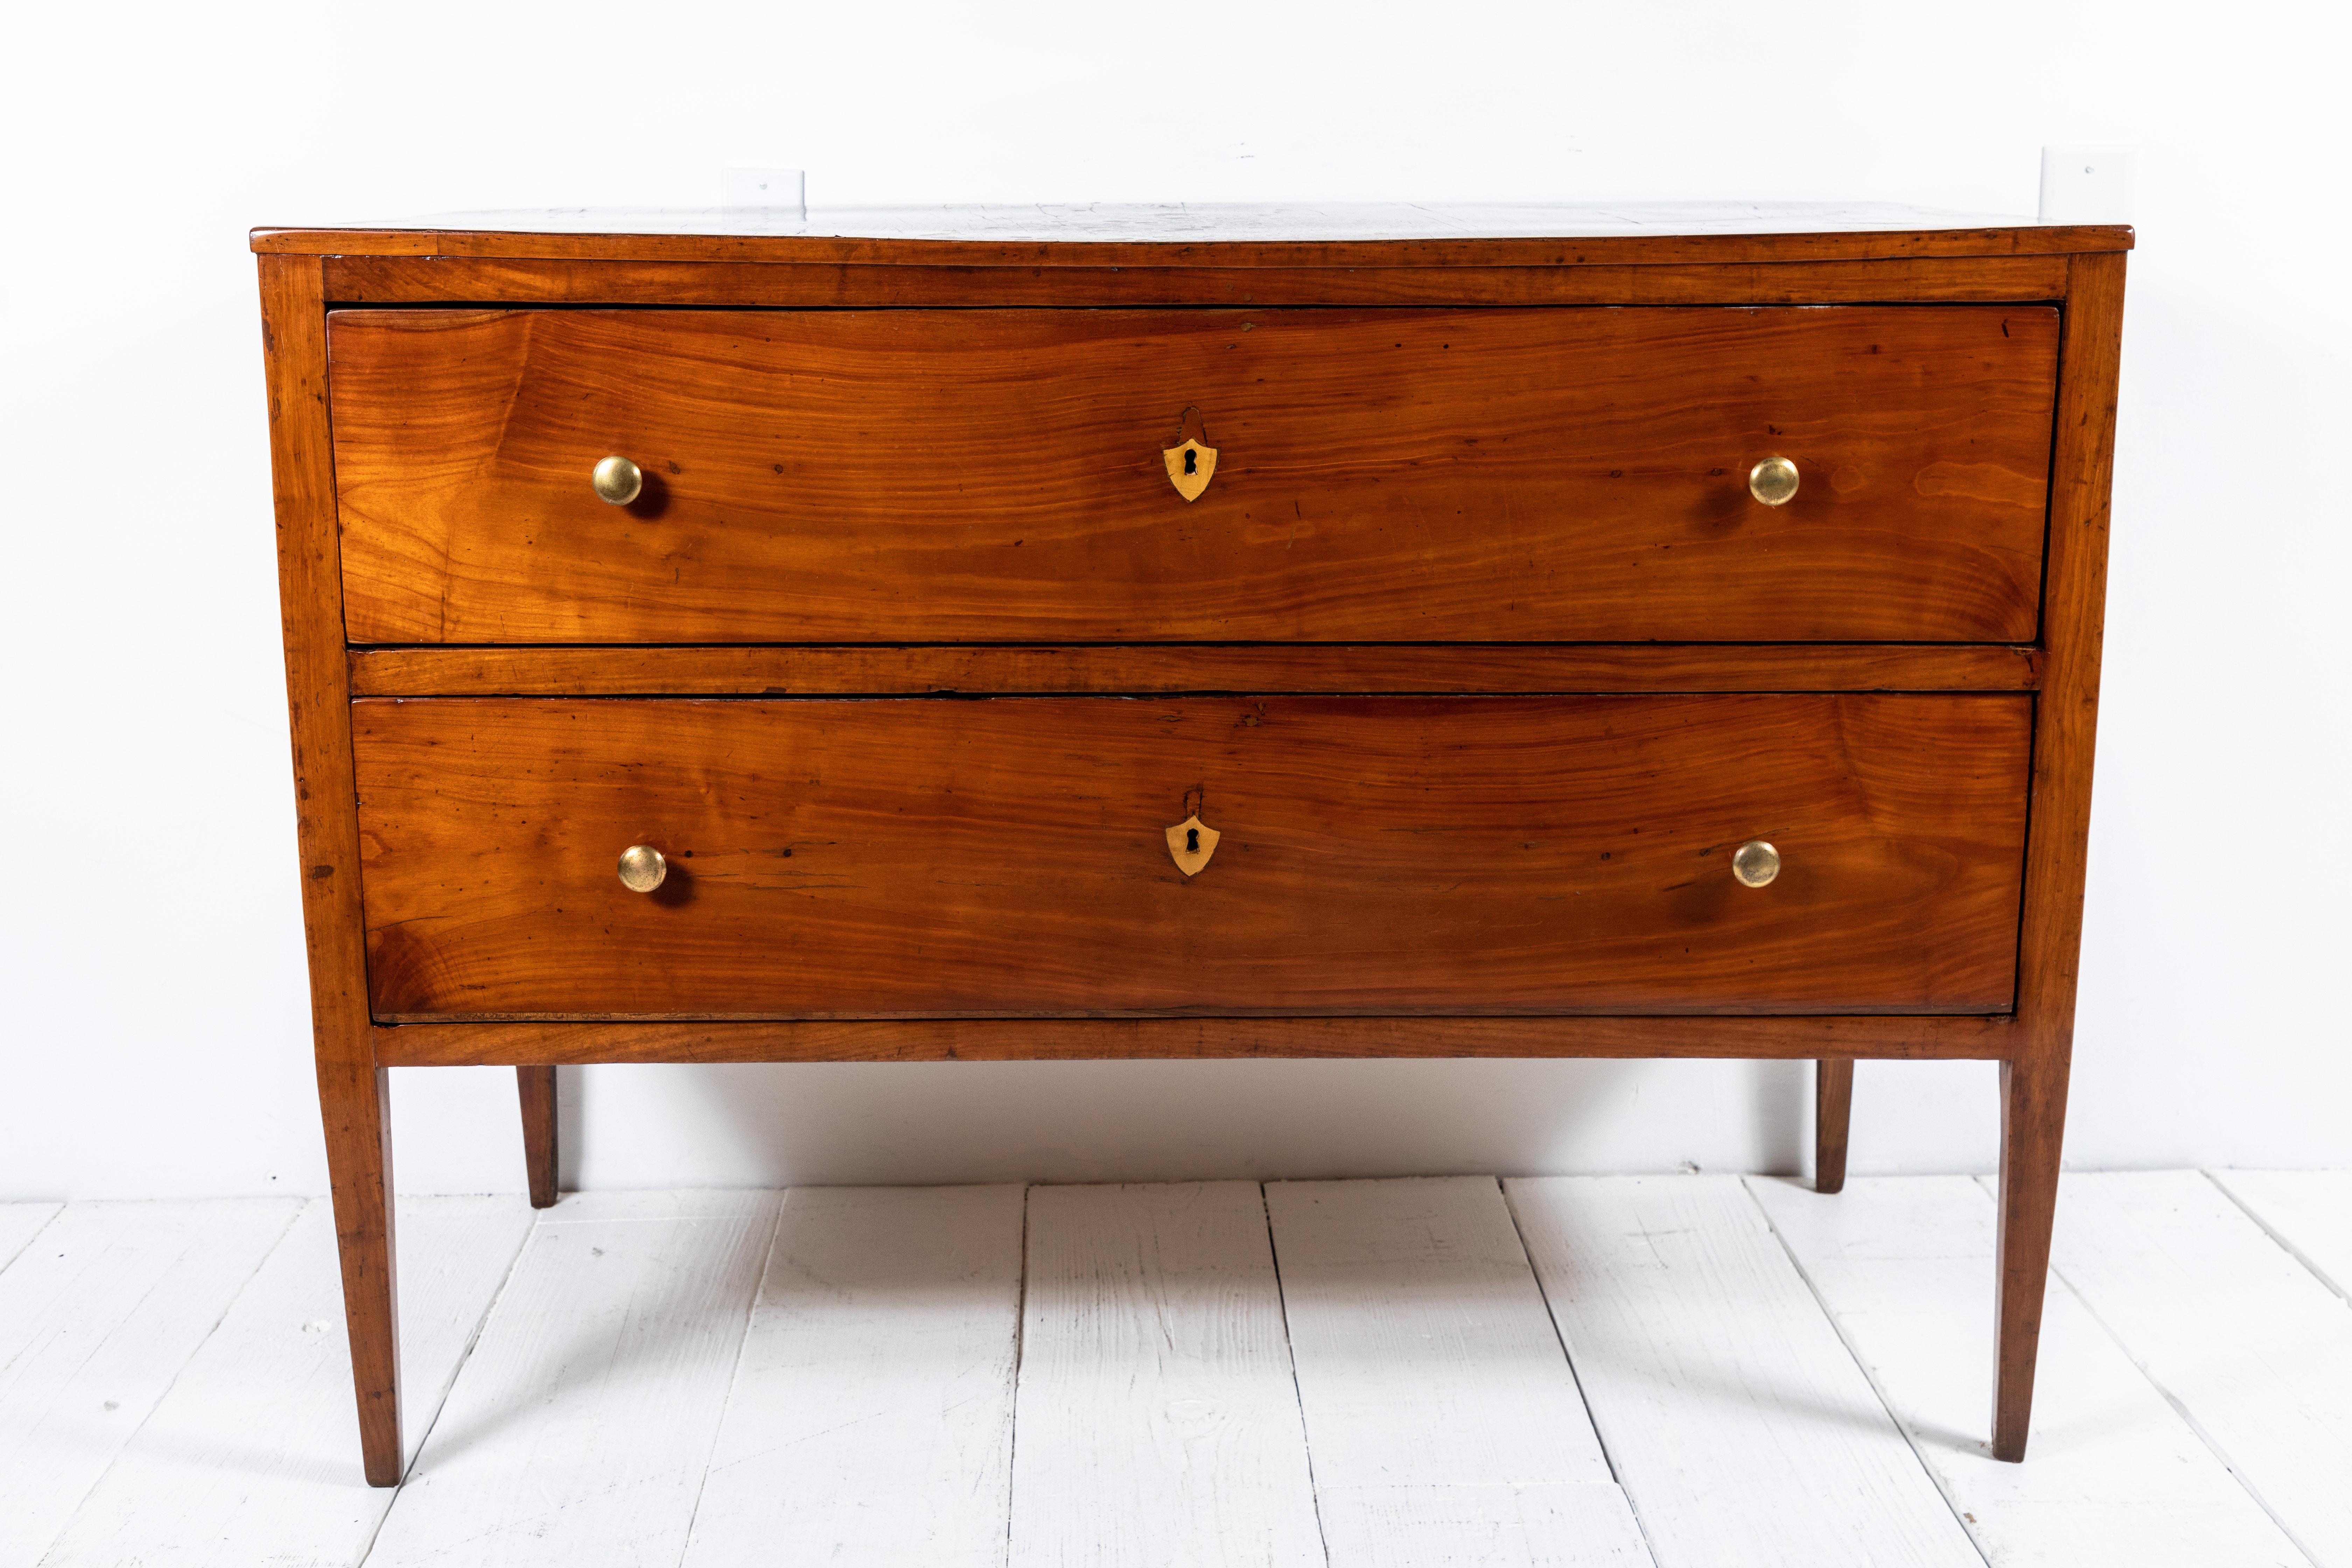 Classic French mahogany two-drawer commode stands tall on four tapped legs. Aged with patina original key holes and hardware. The Commode is grand in appearance.